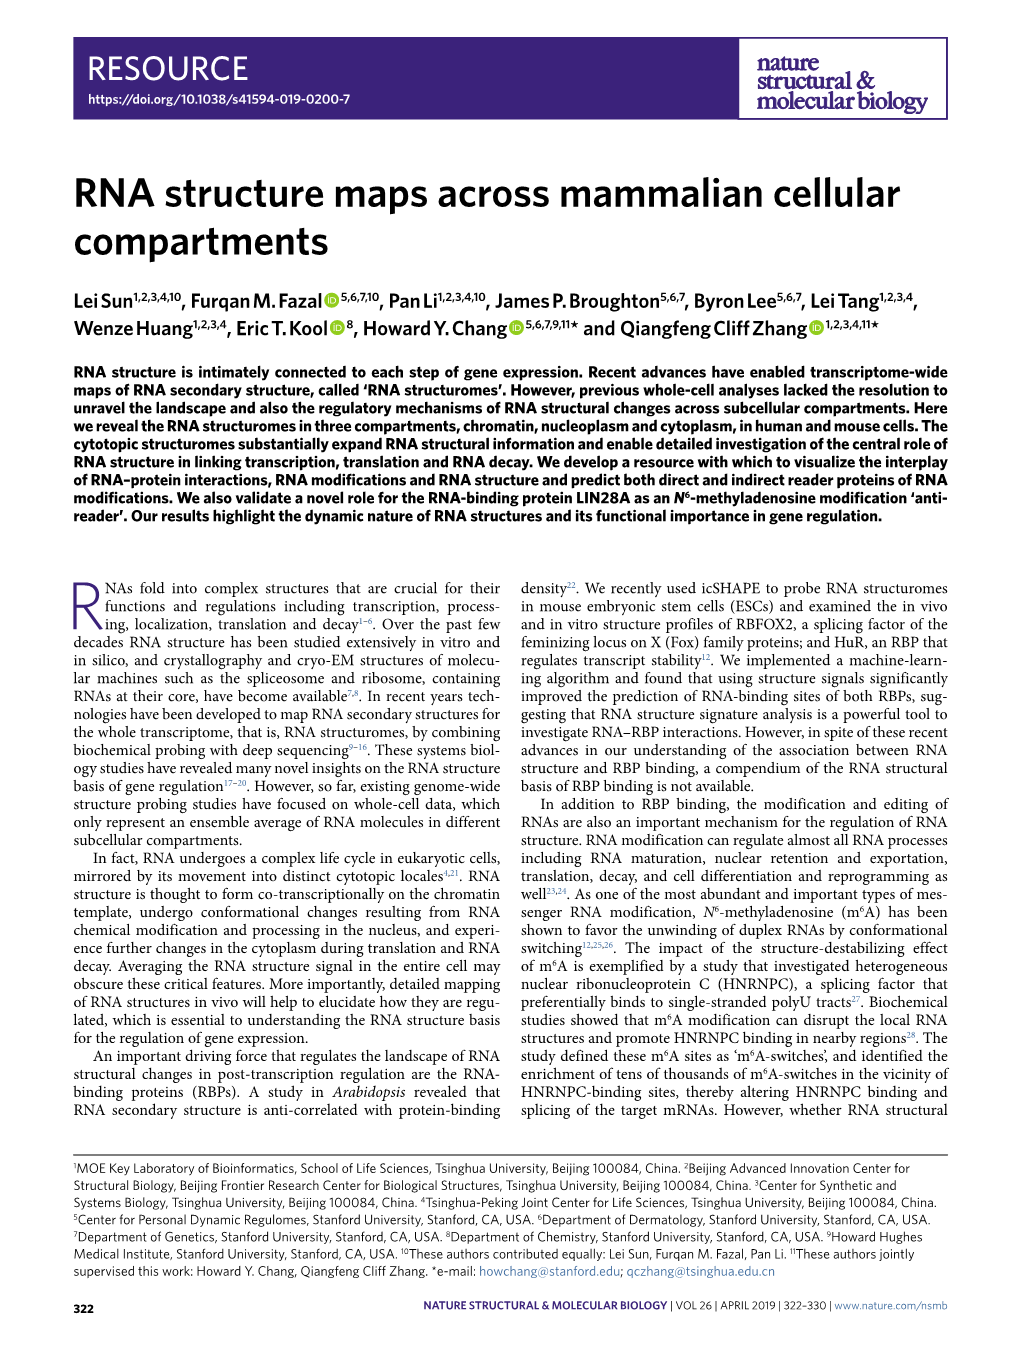 RNA Structure Maps Across Mammalian Cellular Compartments